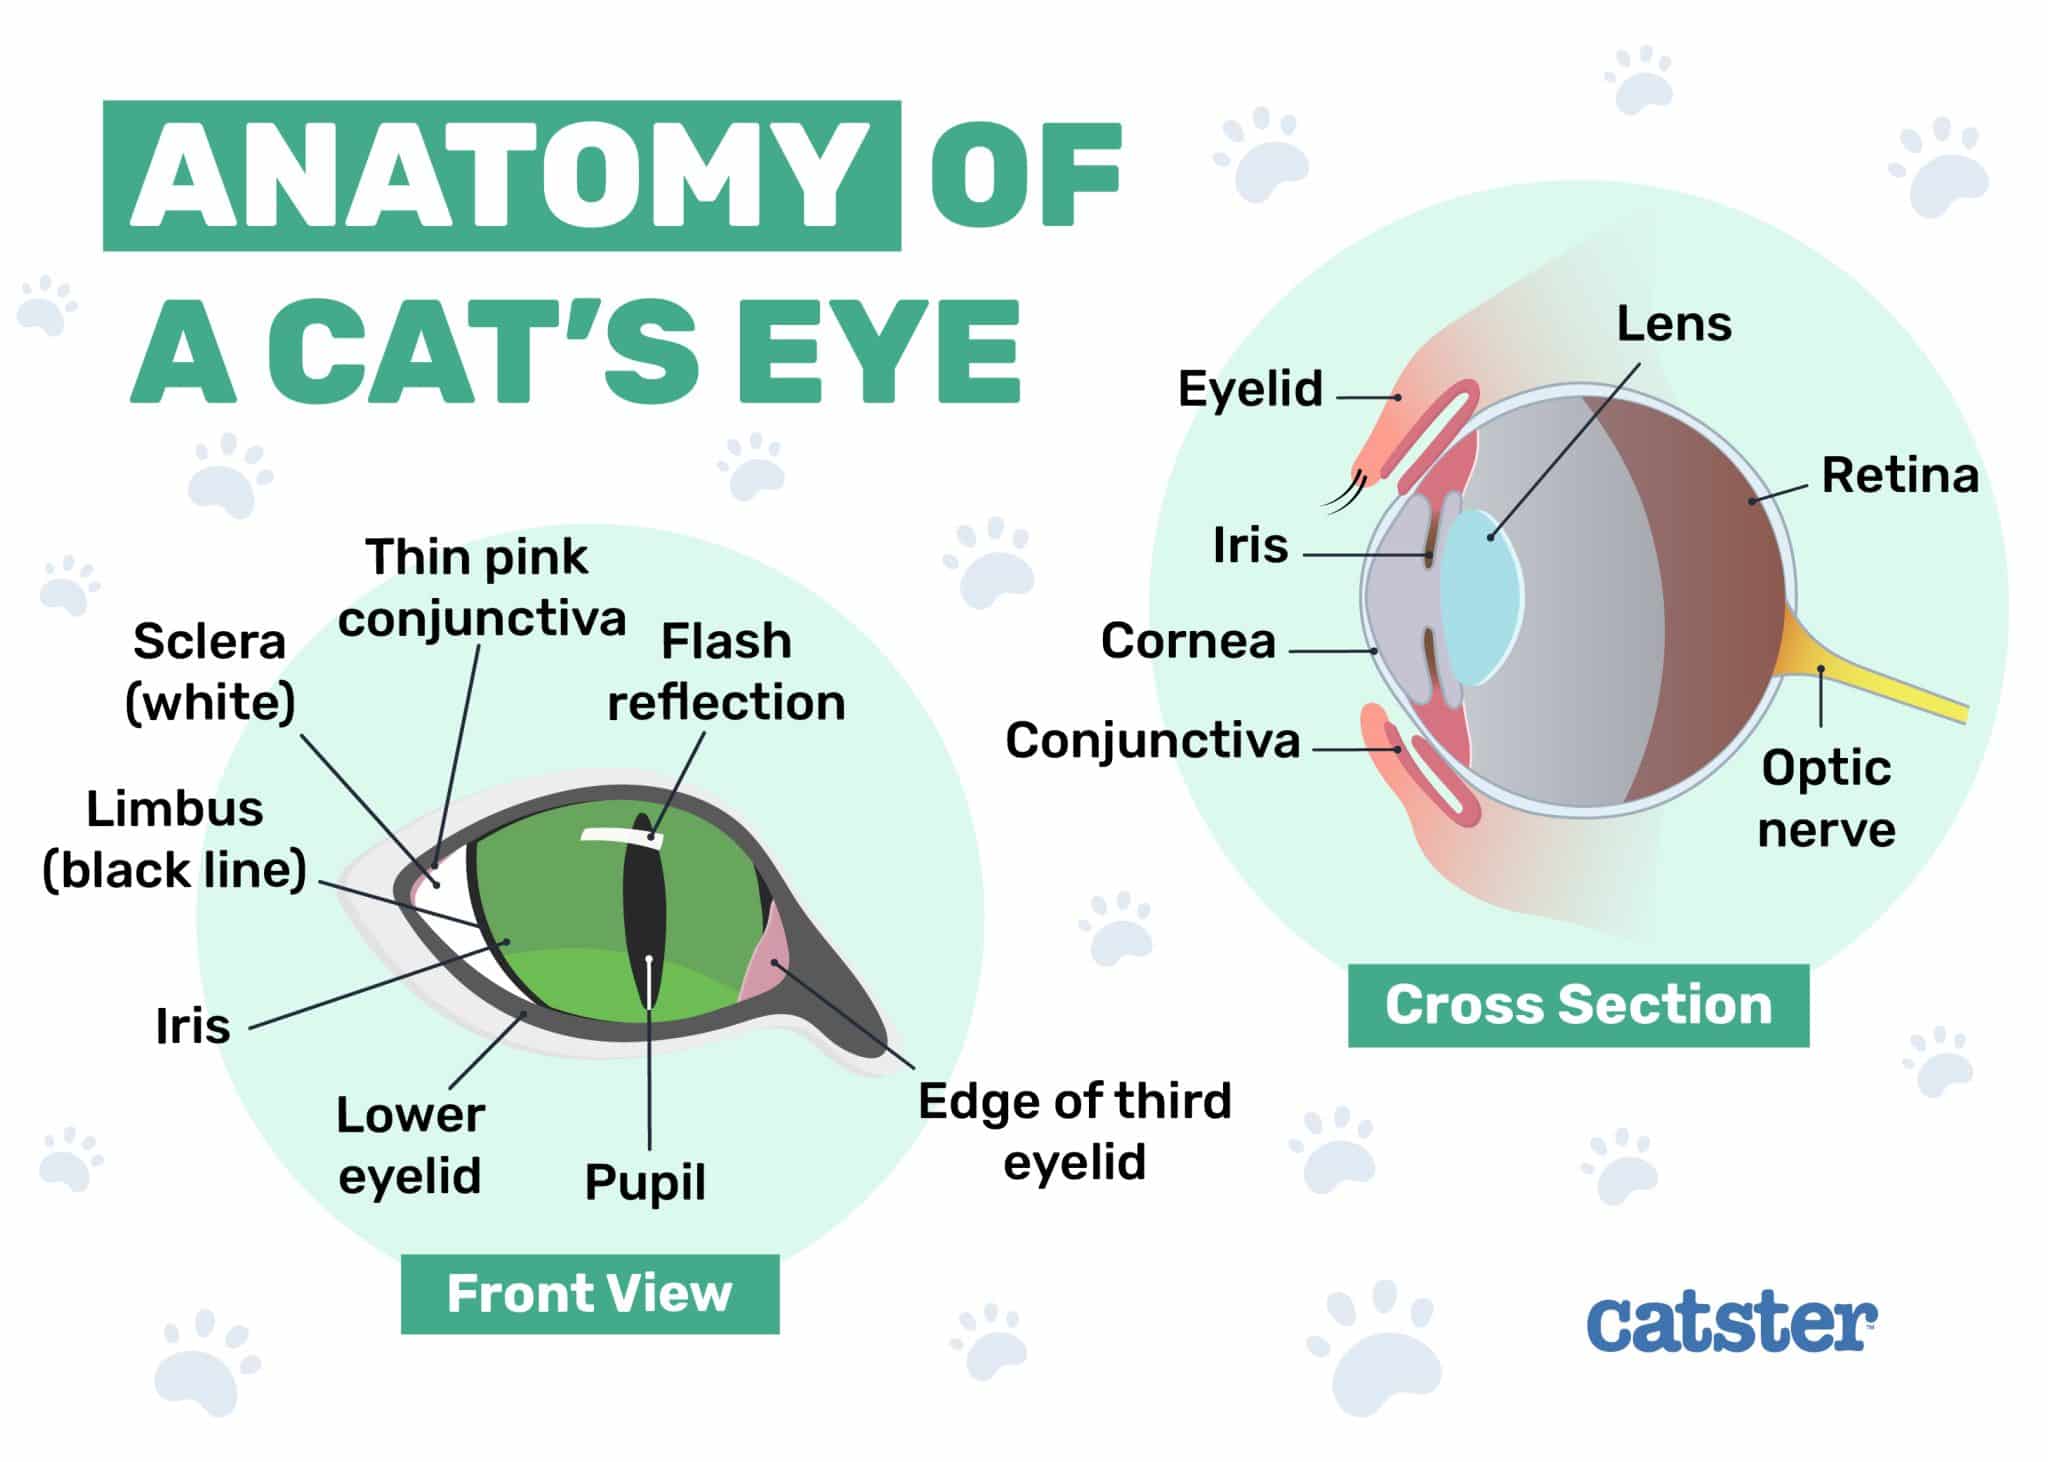 Catster_Anatomy of Cats Eye_Infographic_